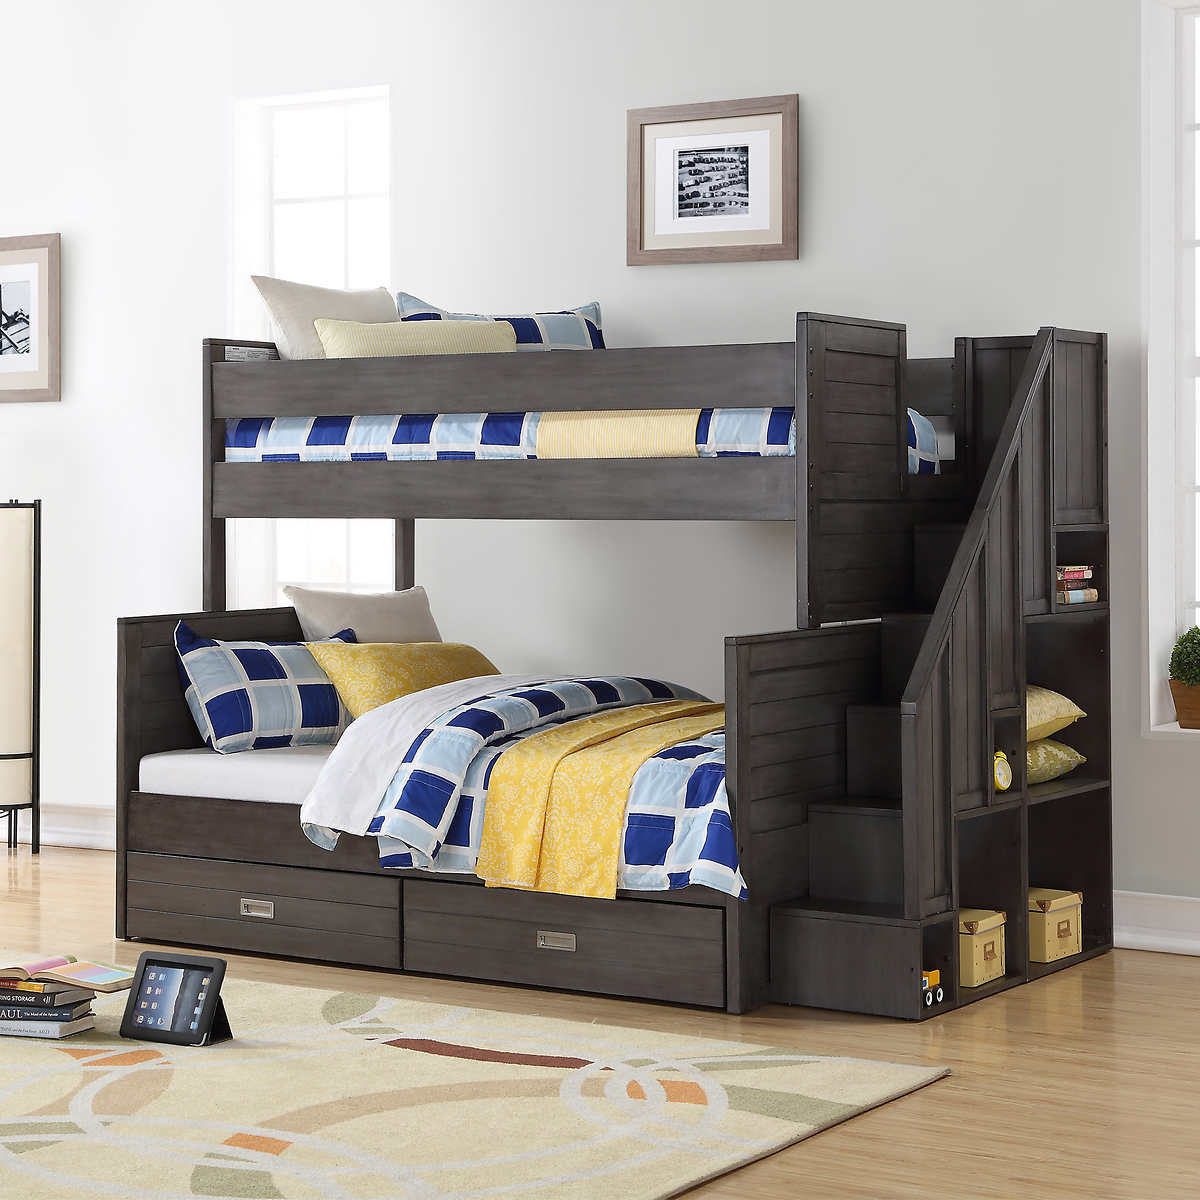 Dylan Twin Over Double Bunk Bed Costco, Bunk Bed Double Double